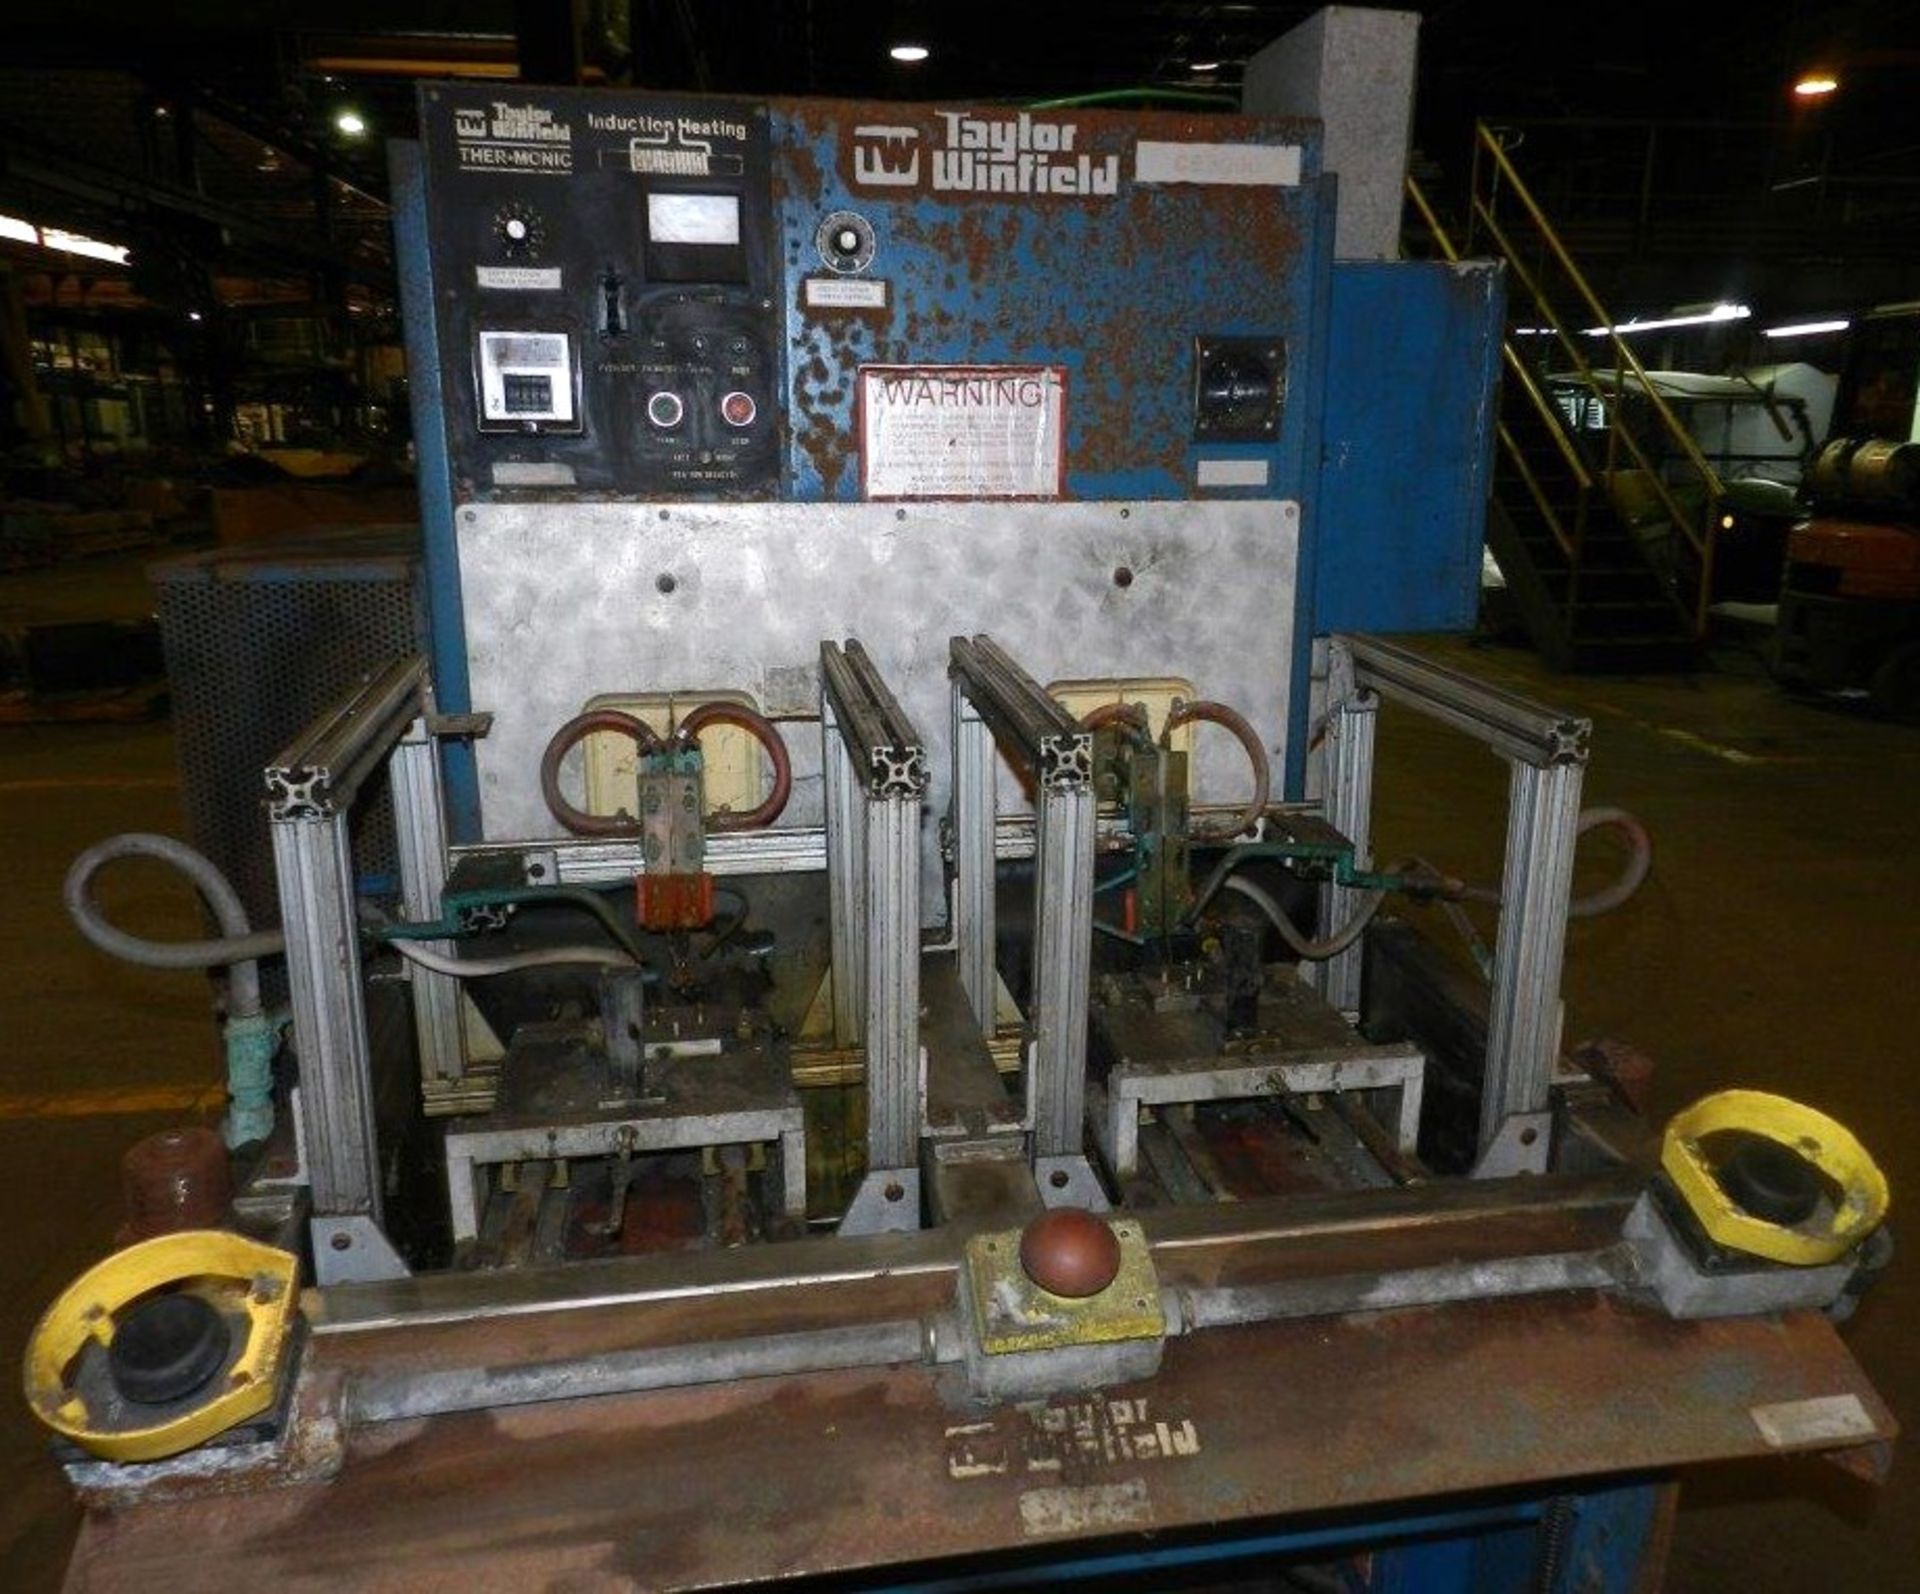 Taylor Winfield CE-3000 30 kW Dual Station Induction Hardener - Image 4 of 12